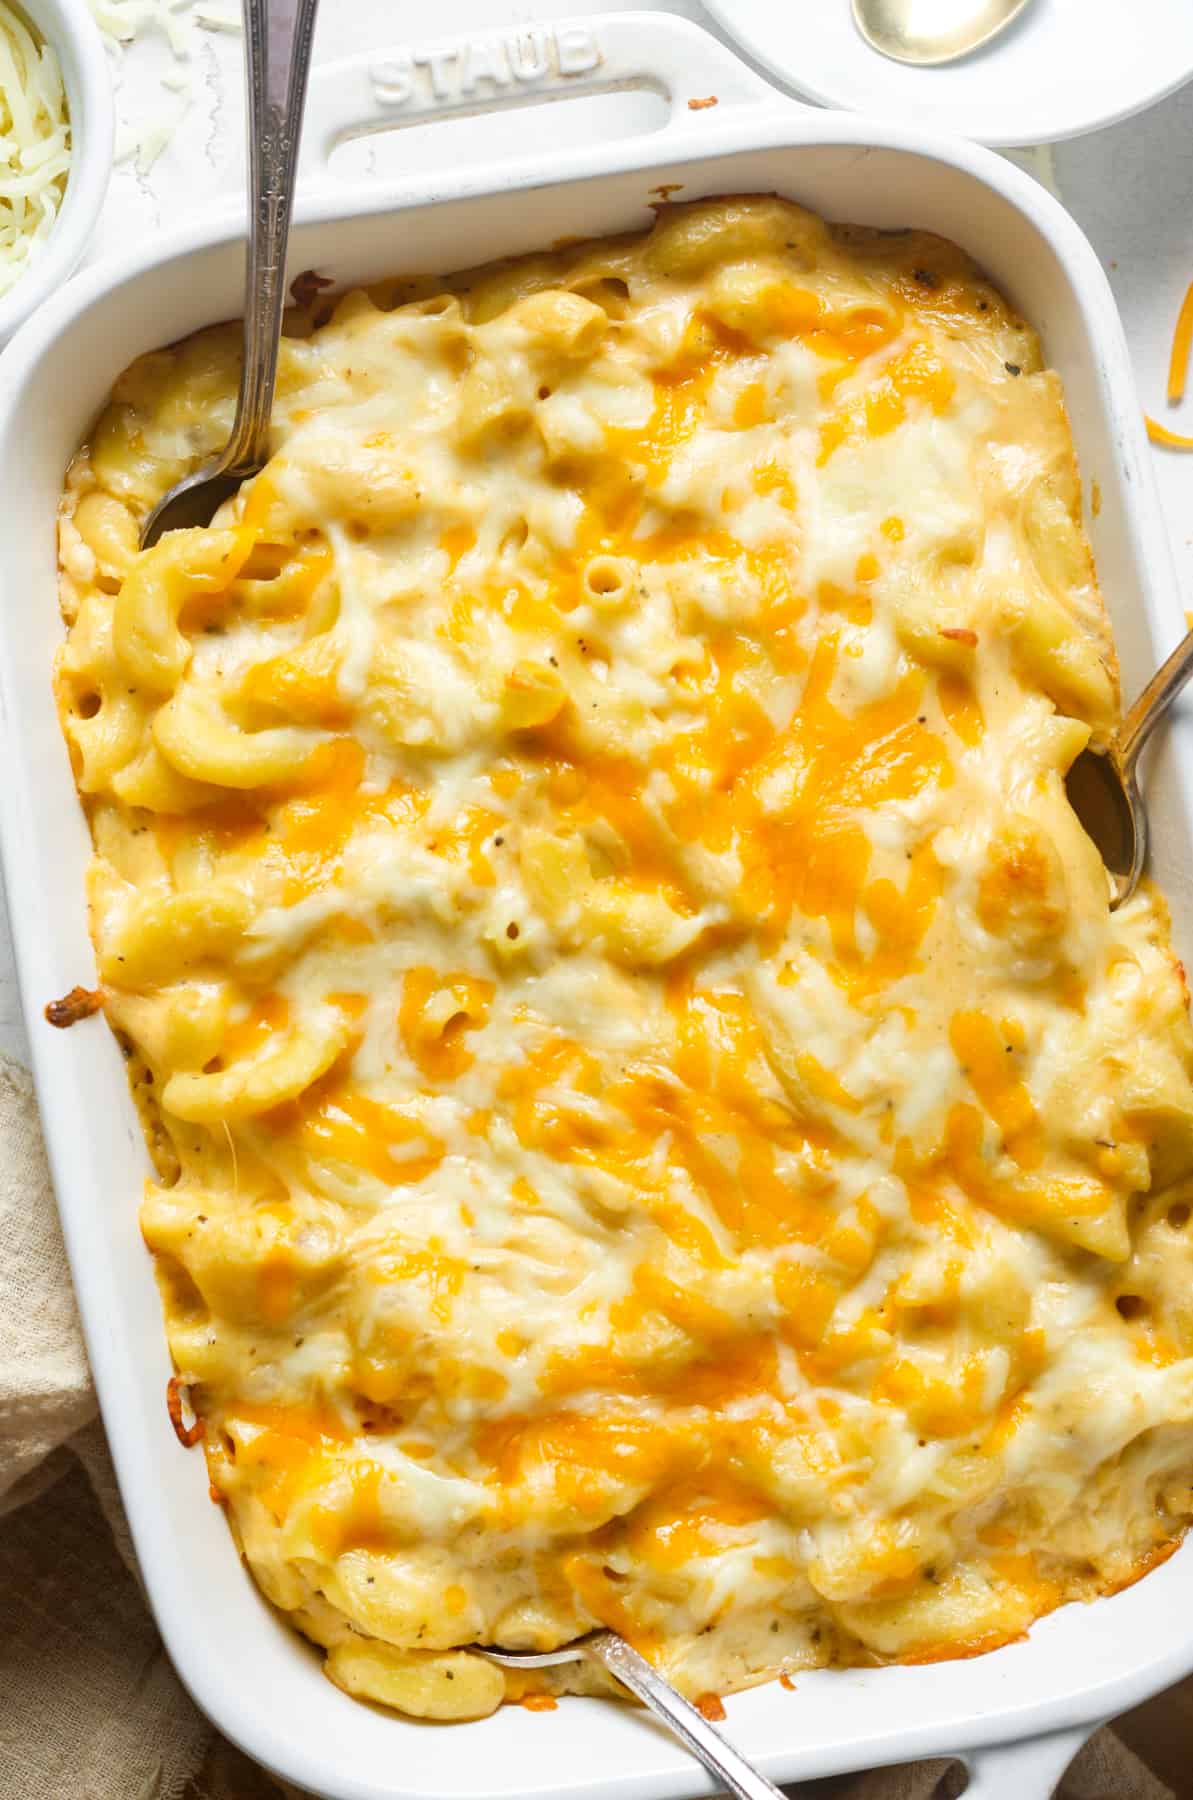 White casserole dish with baked macaroni and cheese.